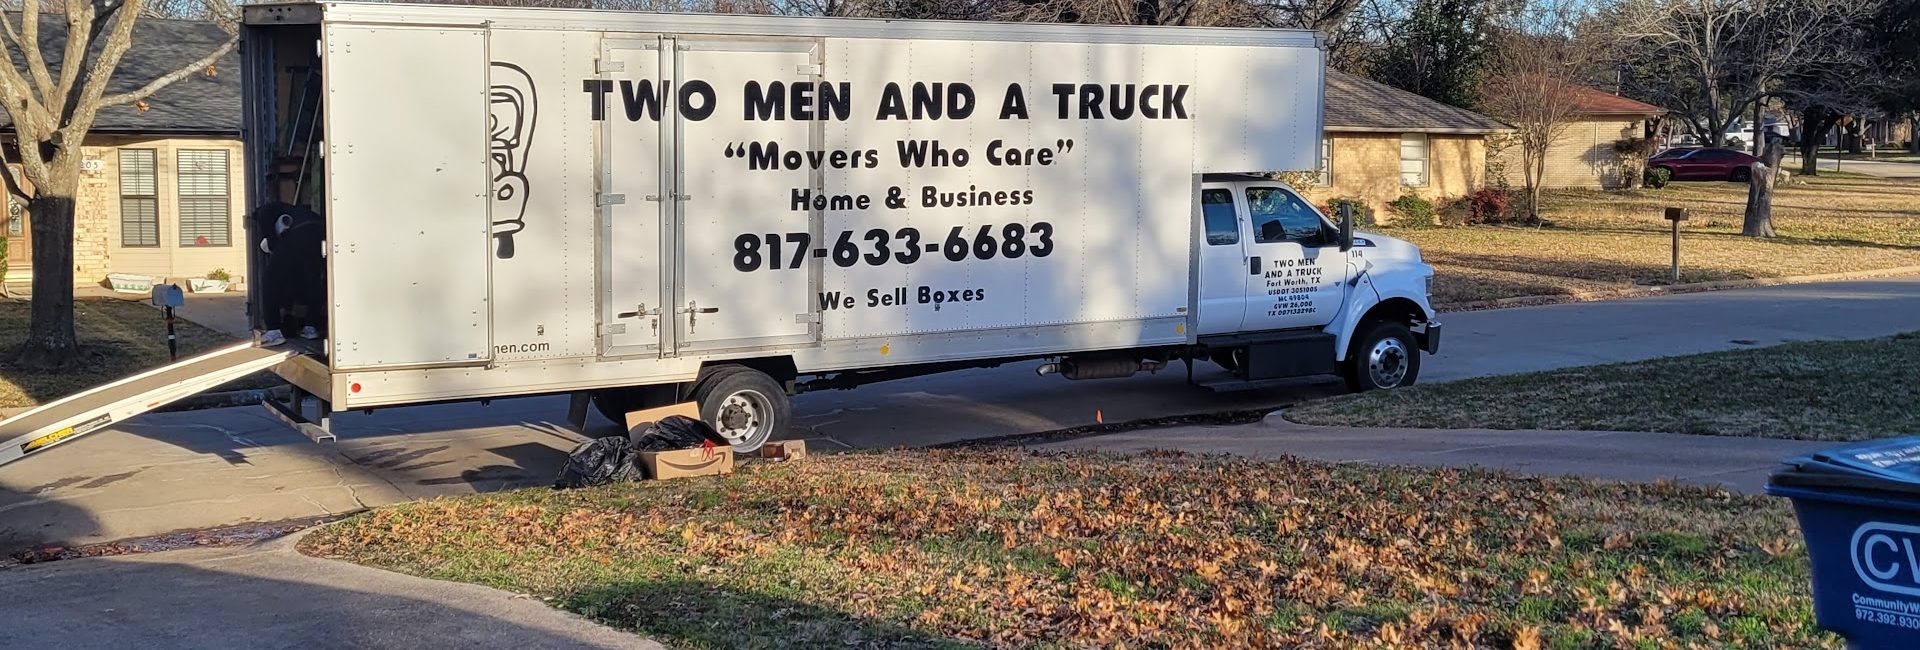 Two Men and a Truck 2